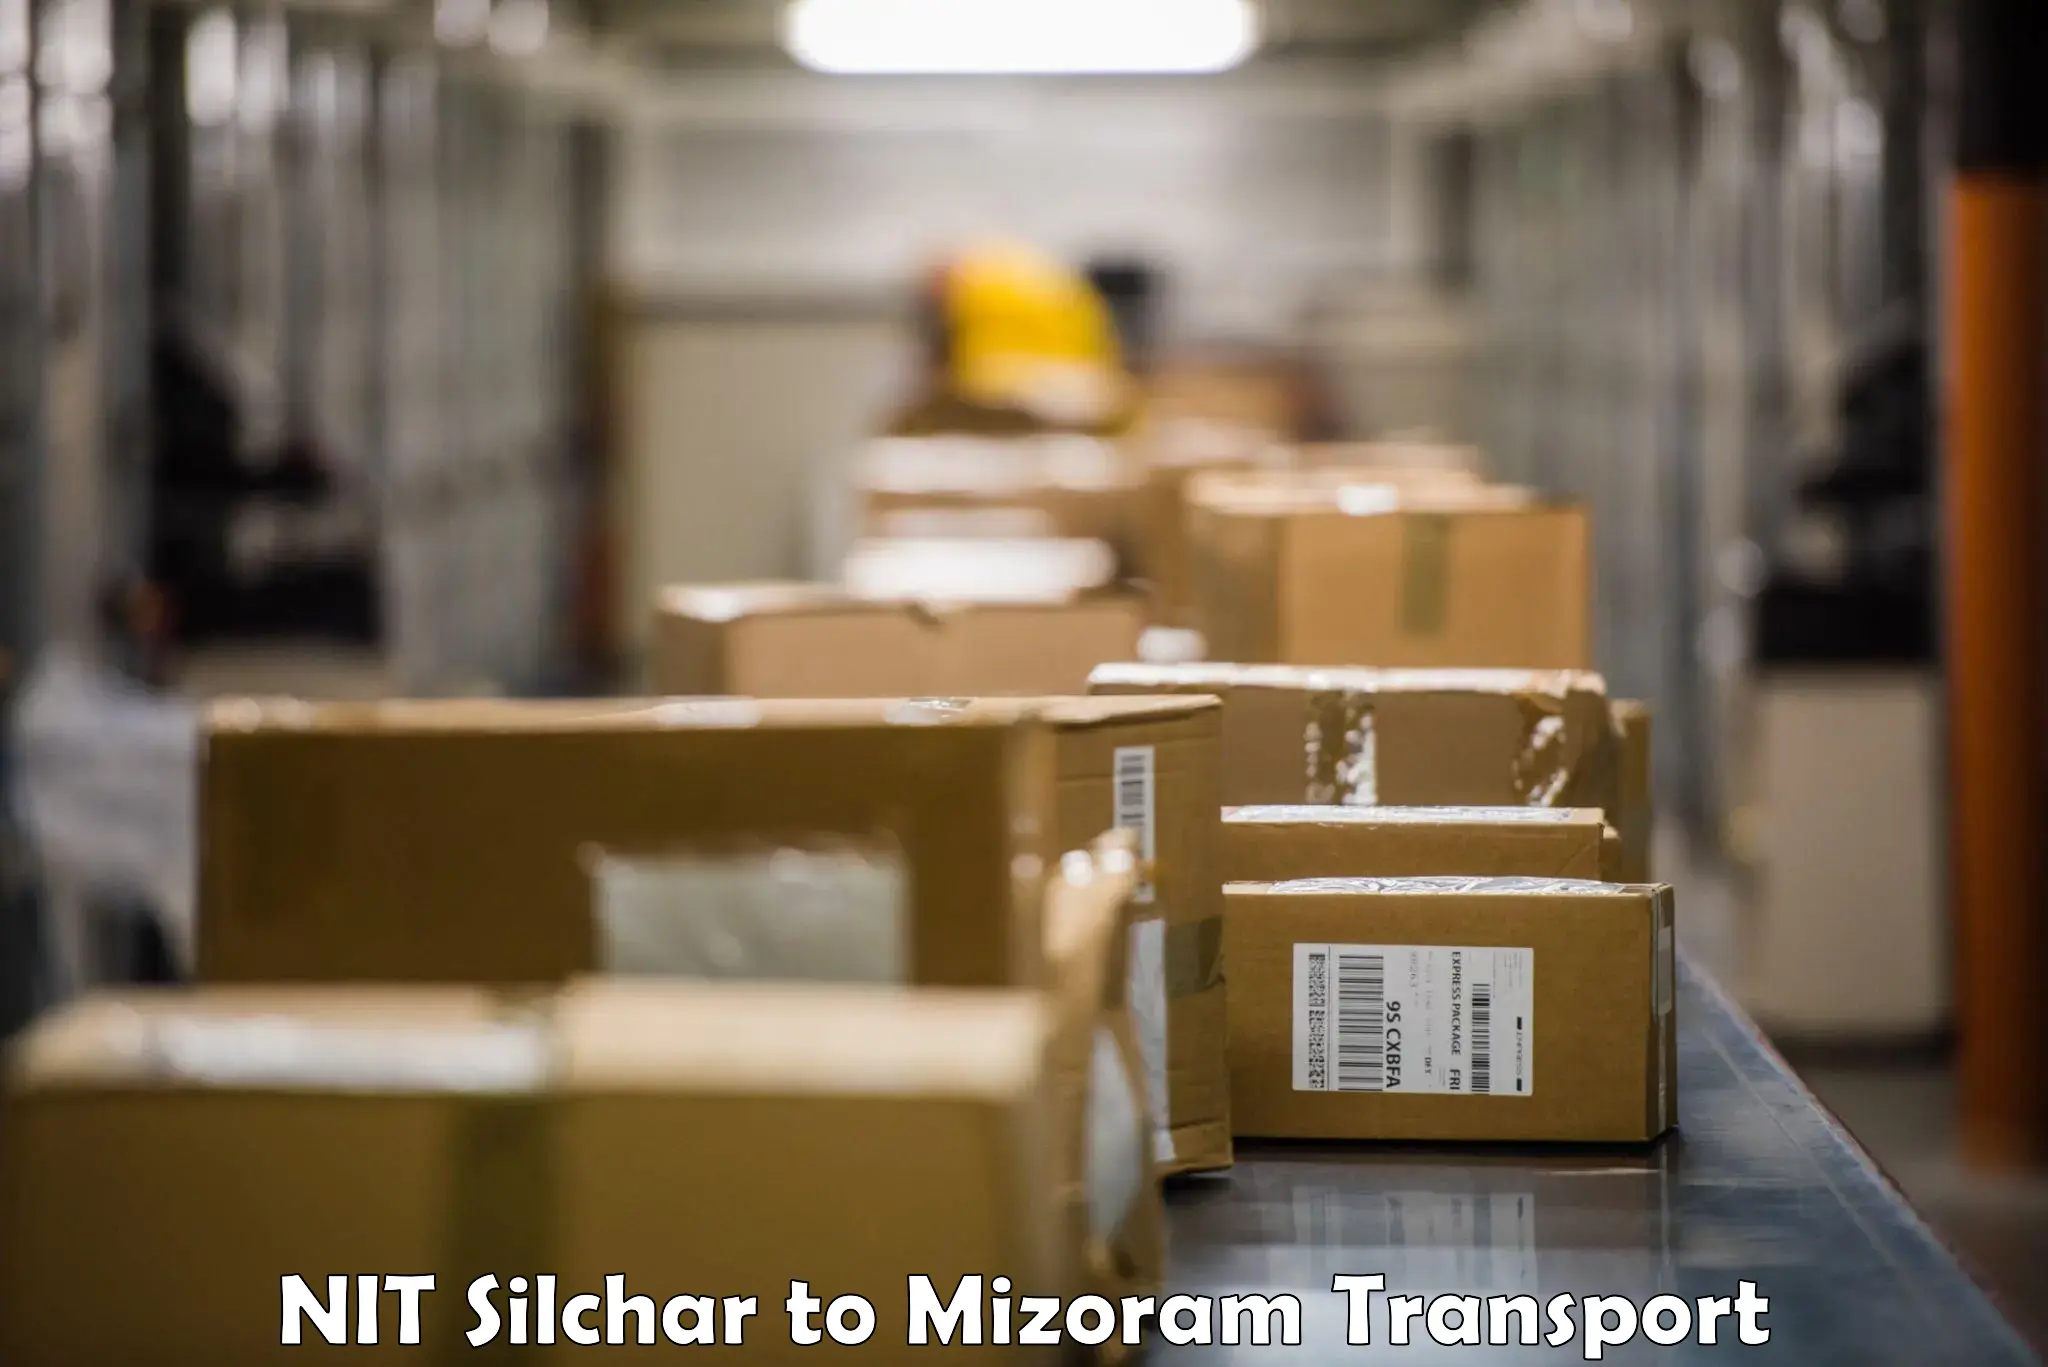 Daily parcel service transport in NIT Silchar to Lunglei